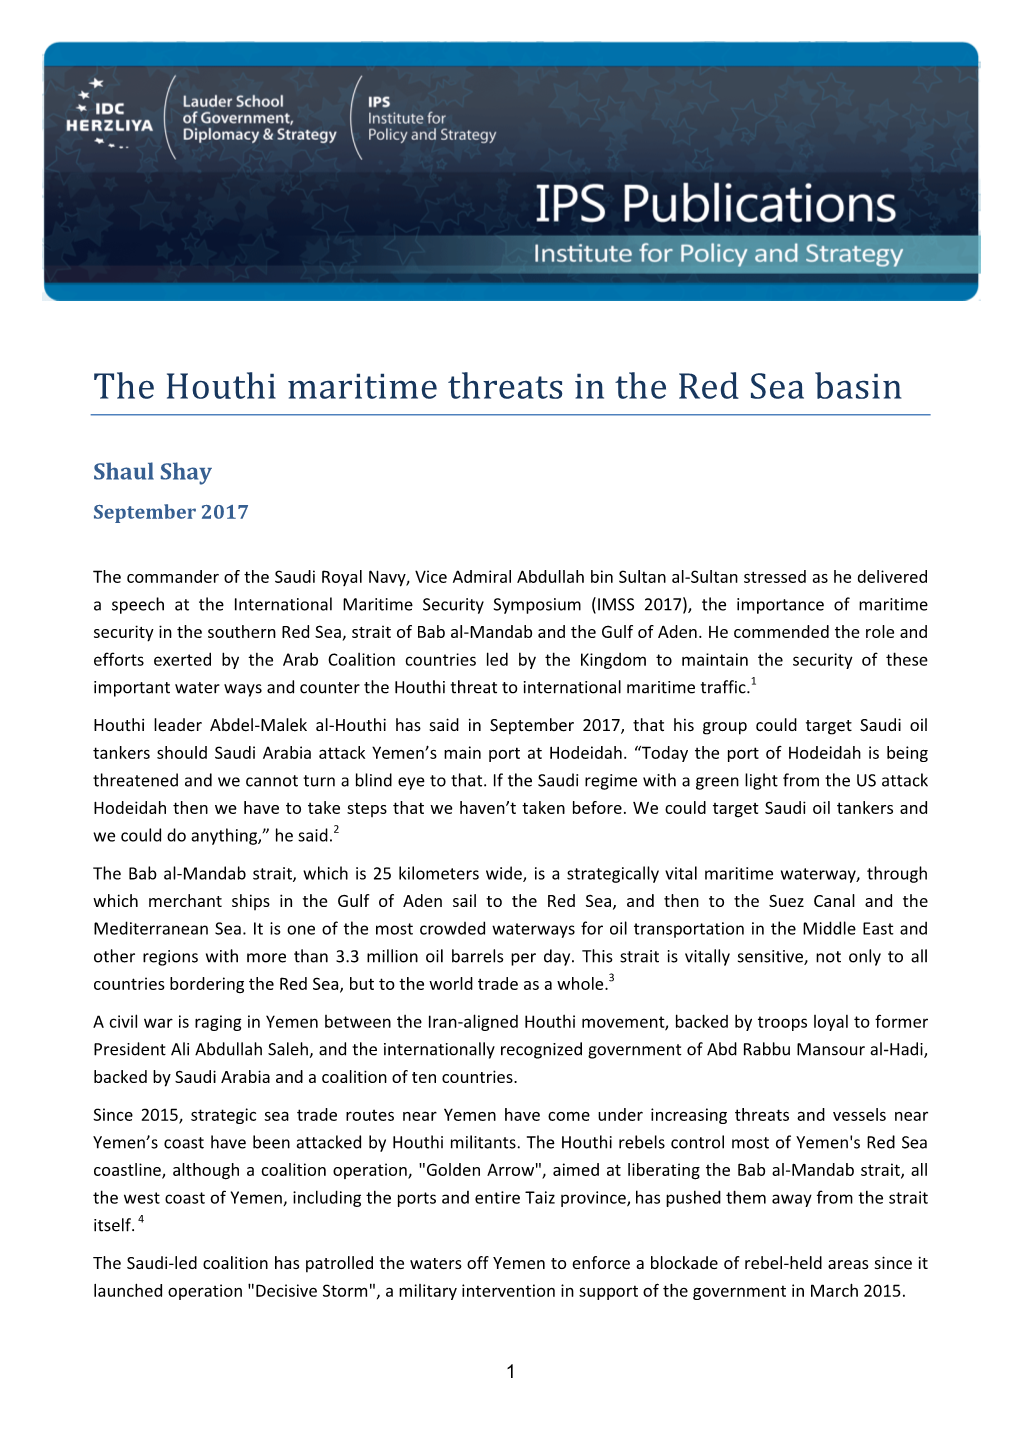 The Houthi Maritime Threats in the Red Sea Basin